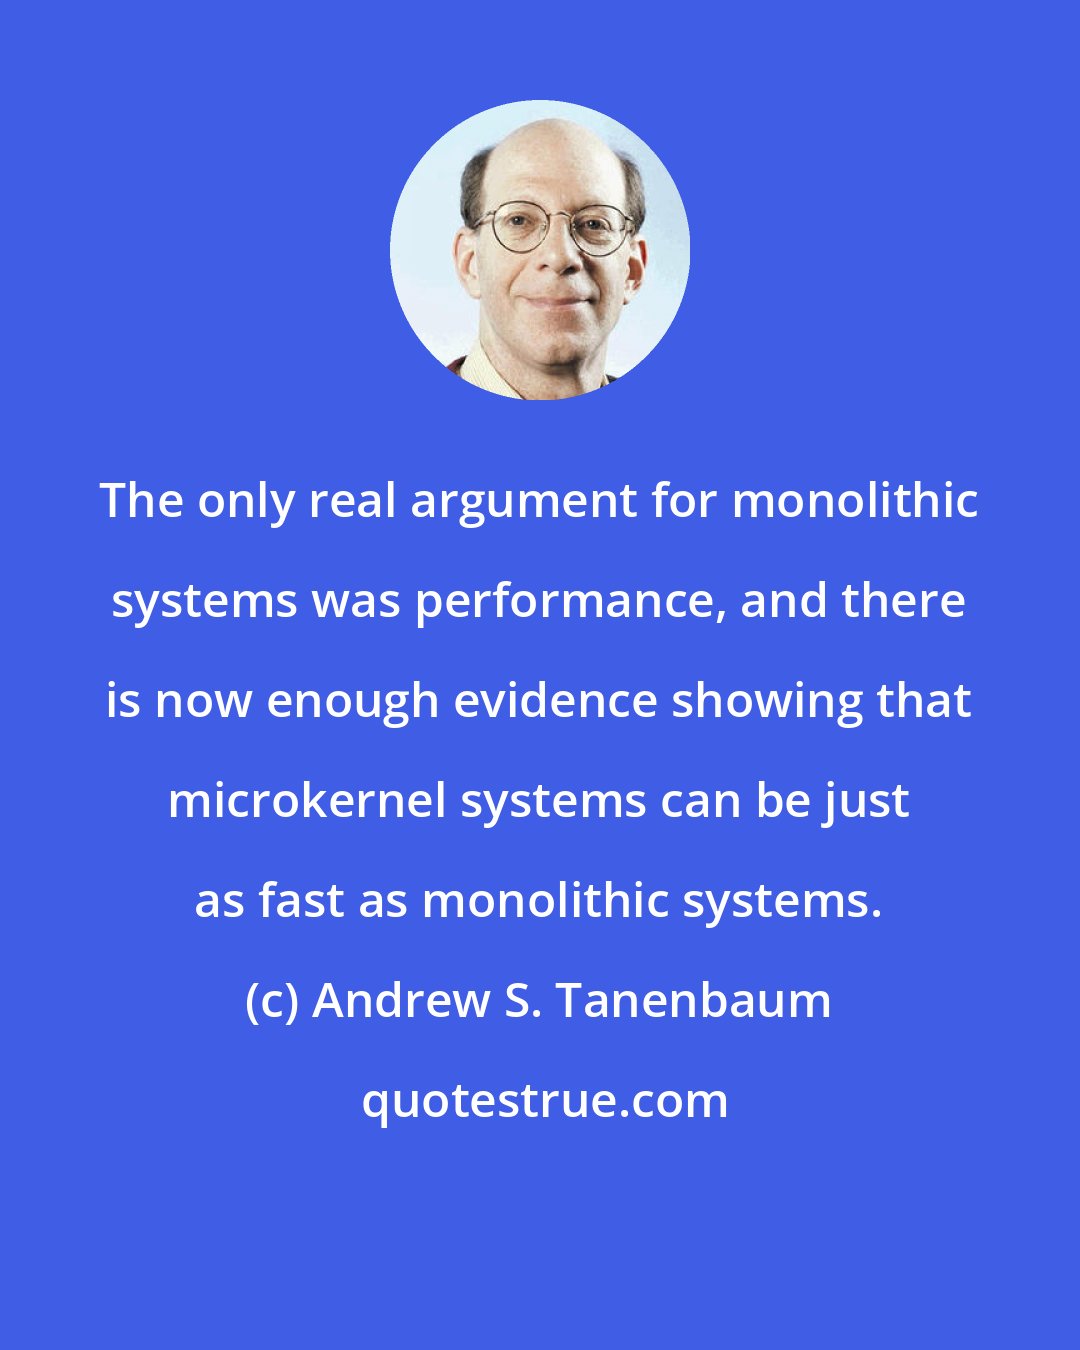 Andrew S. Tanenbaum: The only real argument for monolithic systems was performance, and there is now enough evidence showing that microkernel systems can be just as fast as monolithic systems.